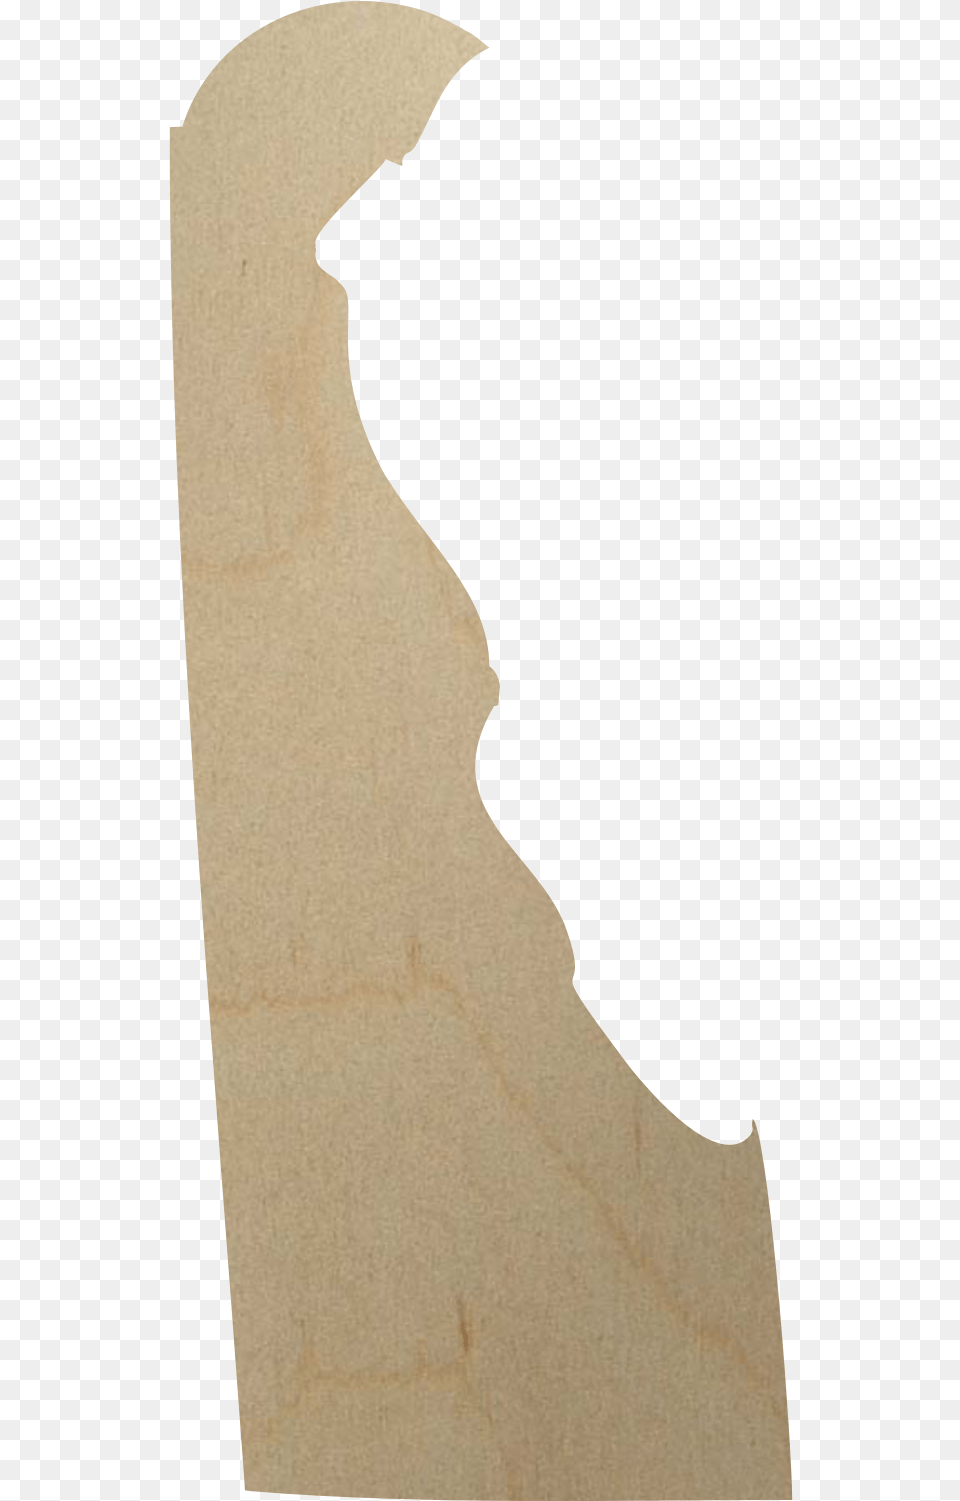 Delaware State Wood Cutout Delaware State Shape, Person, Silhouette Png